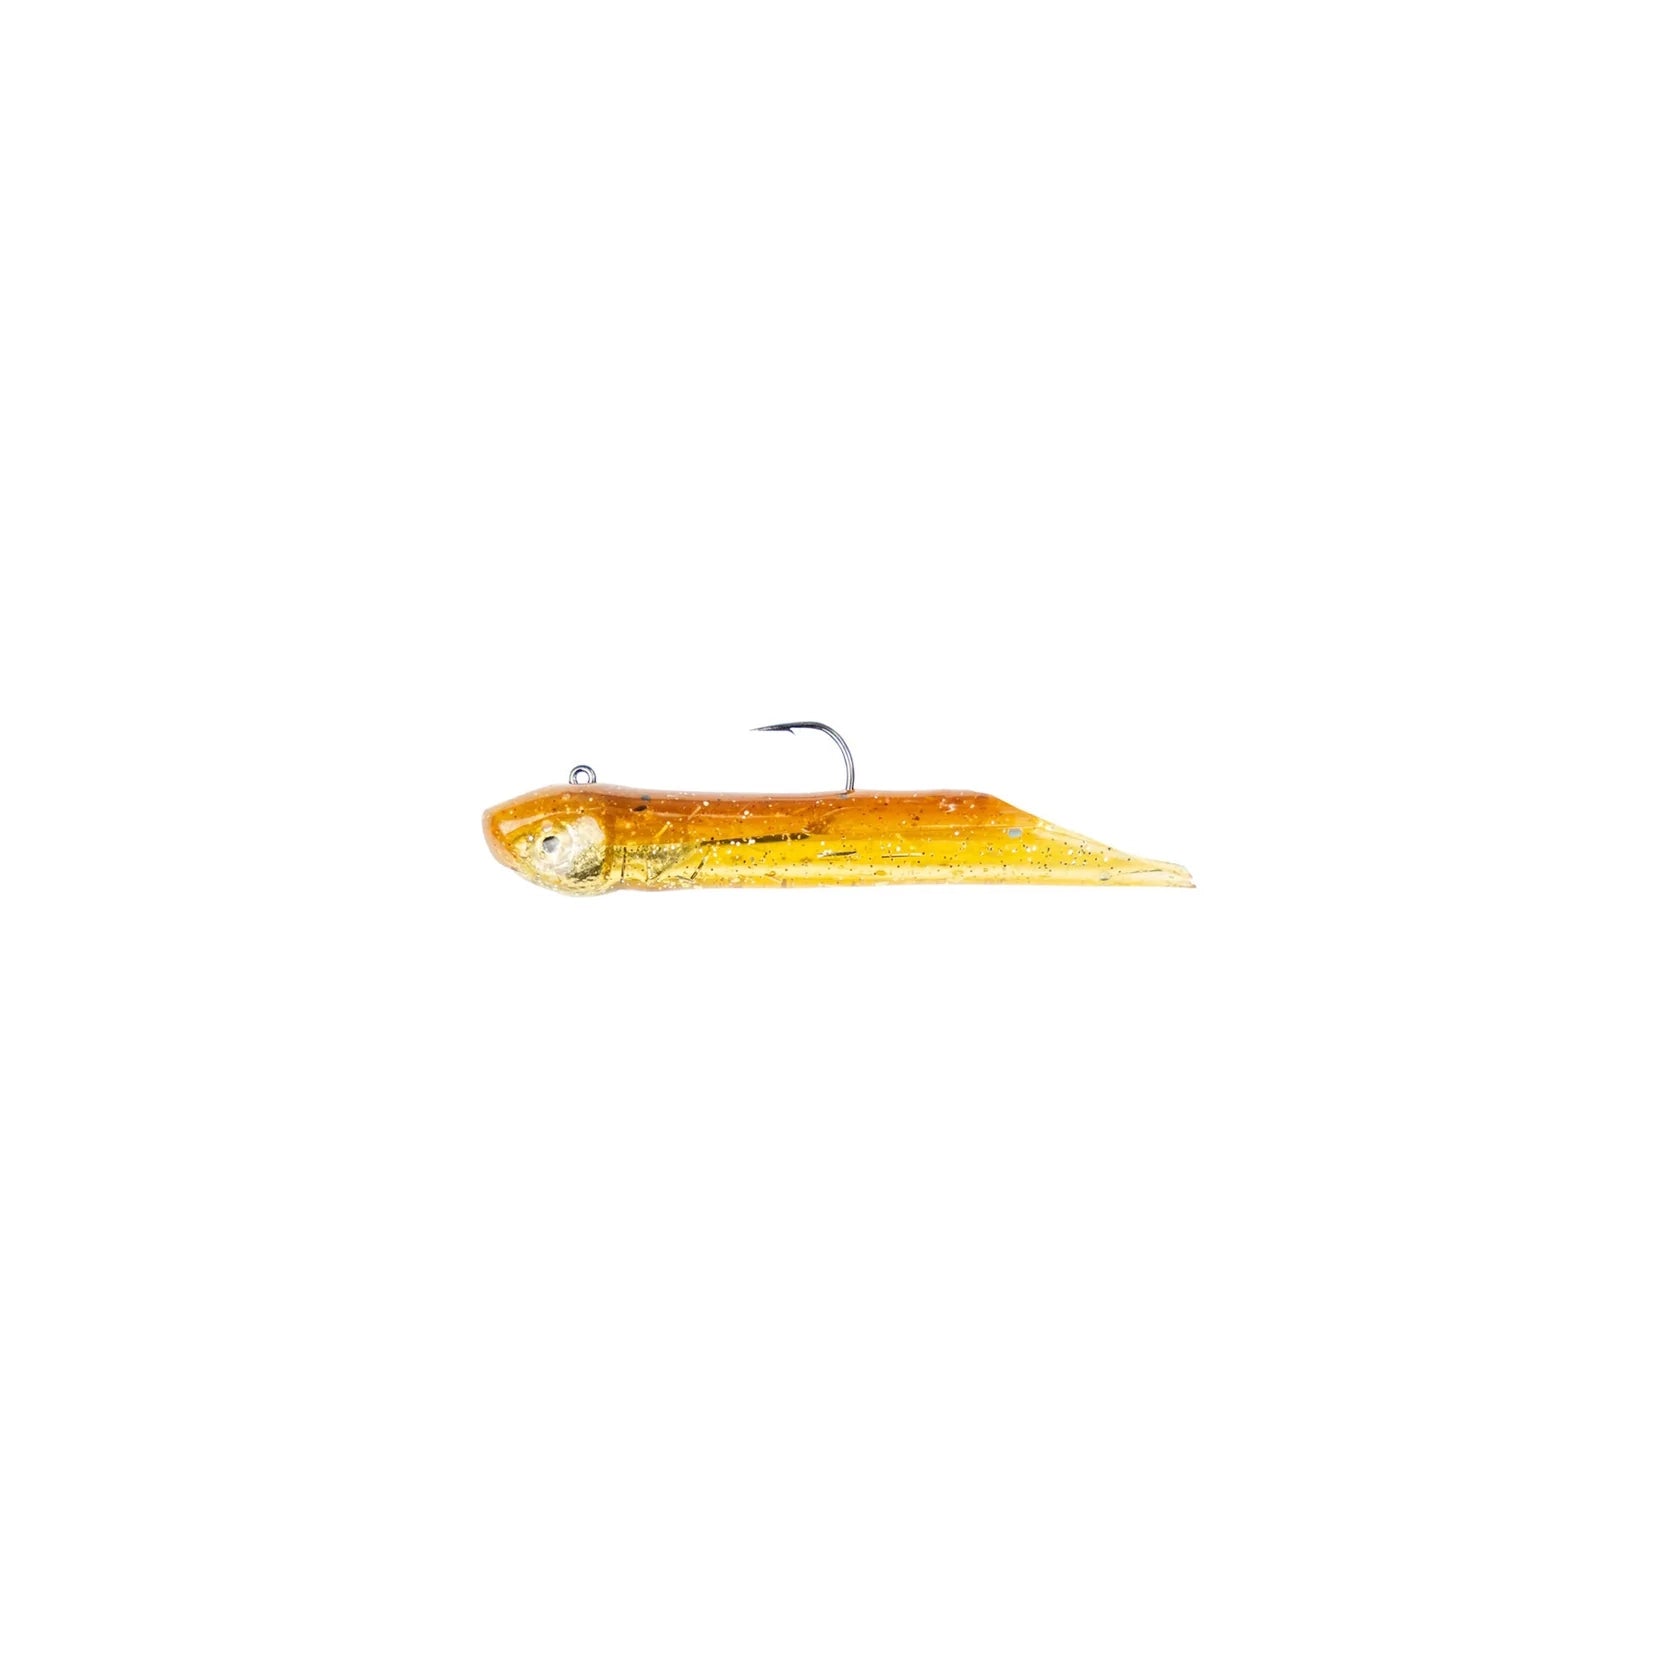 Hookup Baits - Small Baits - 1/32oz and 1/16oz – Been There Caught